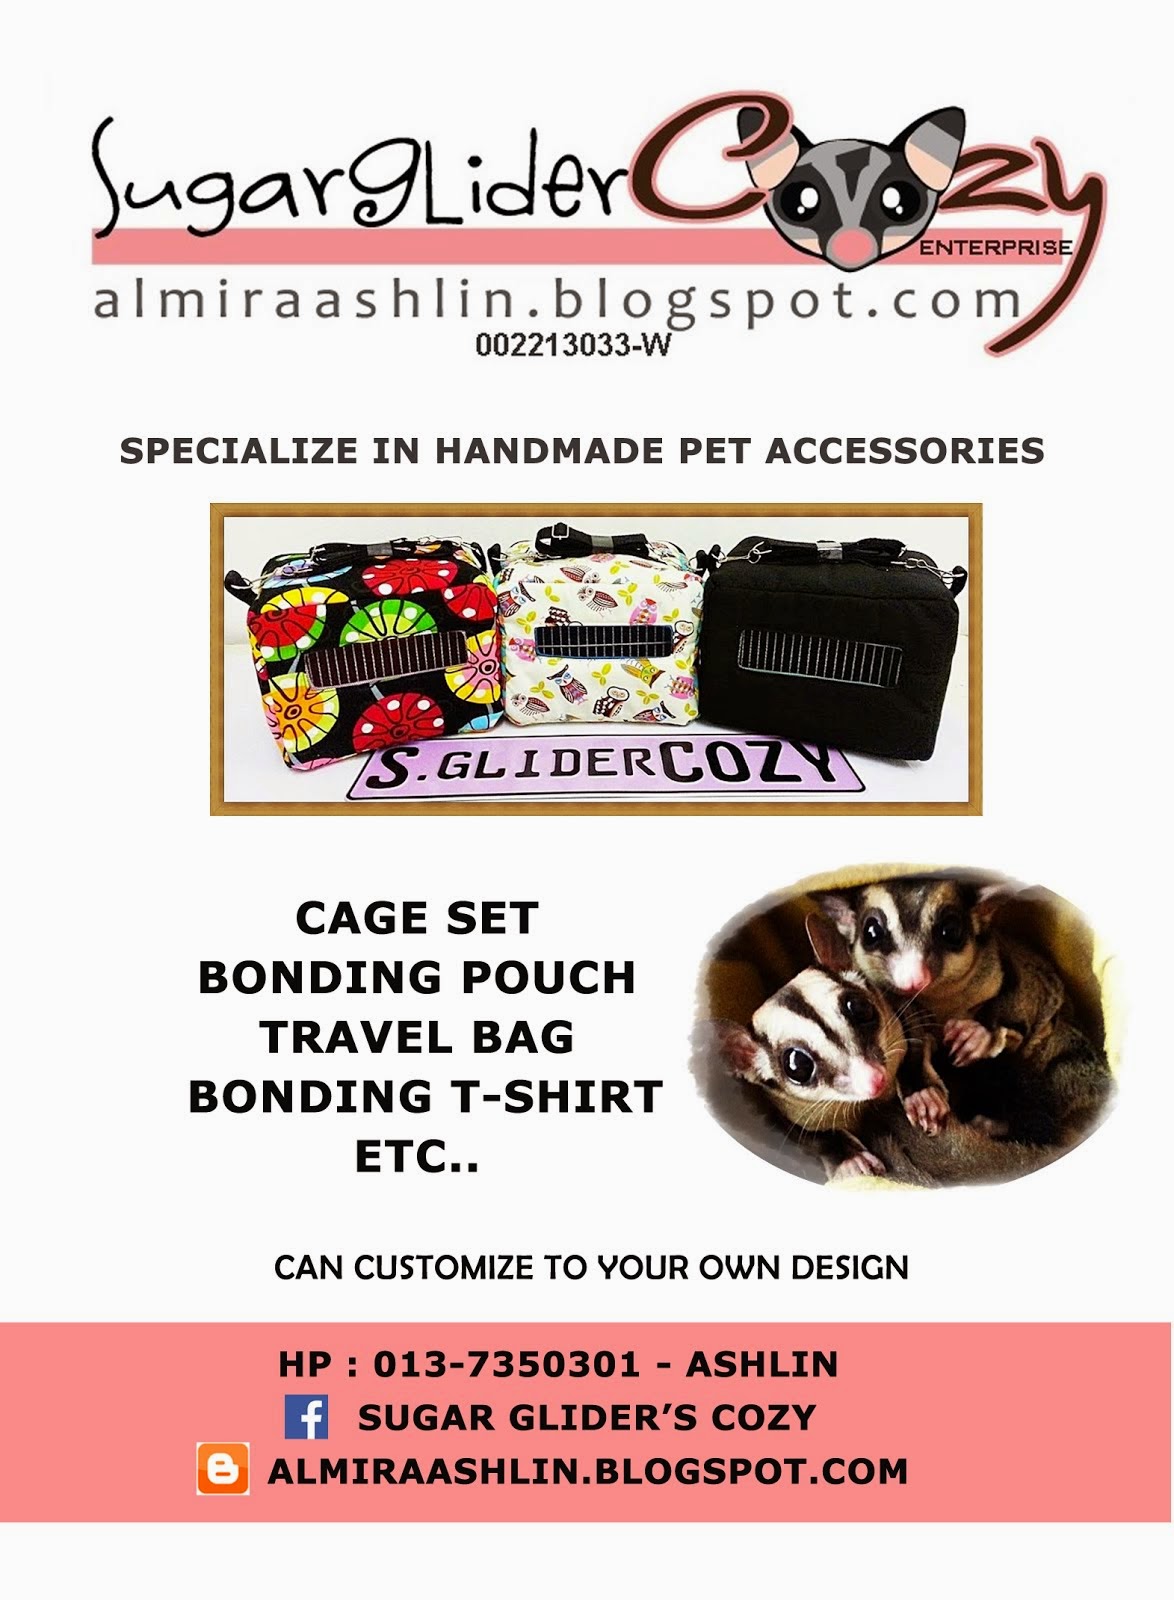 Specialize in handmade pet accessories